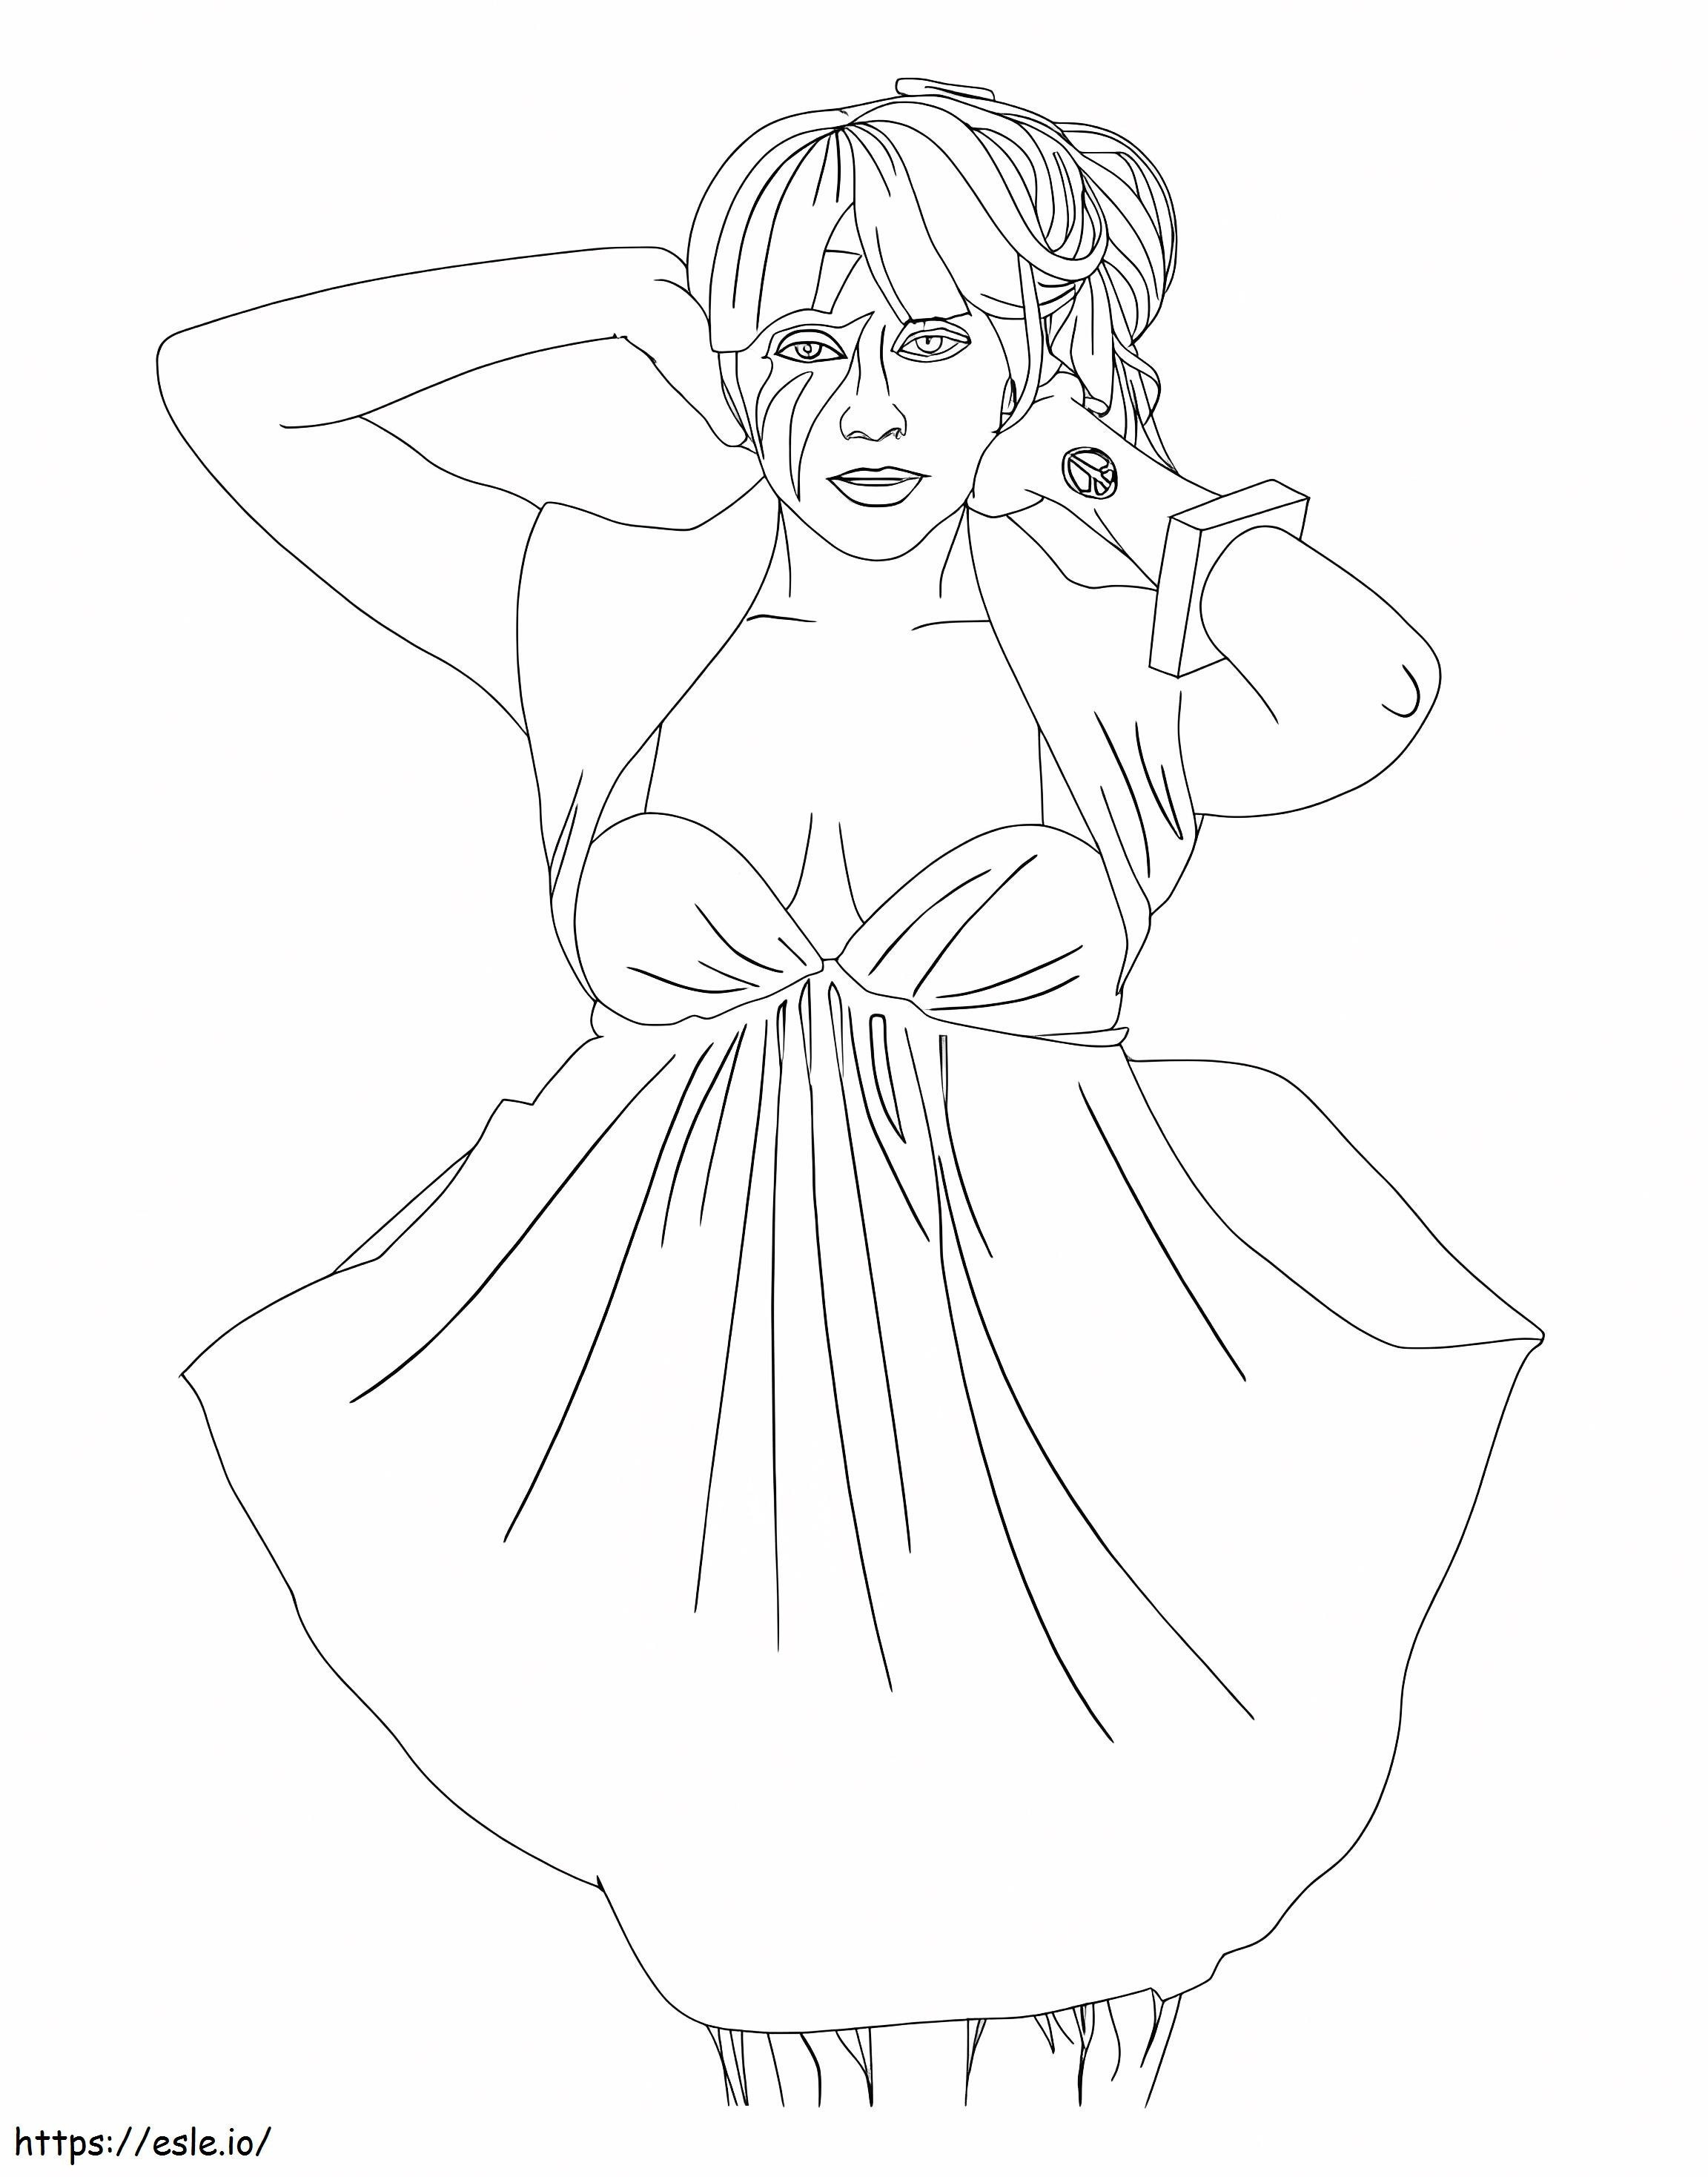 Cool Lady Gaga coloring page